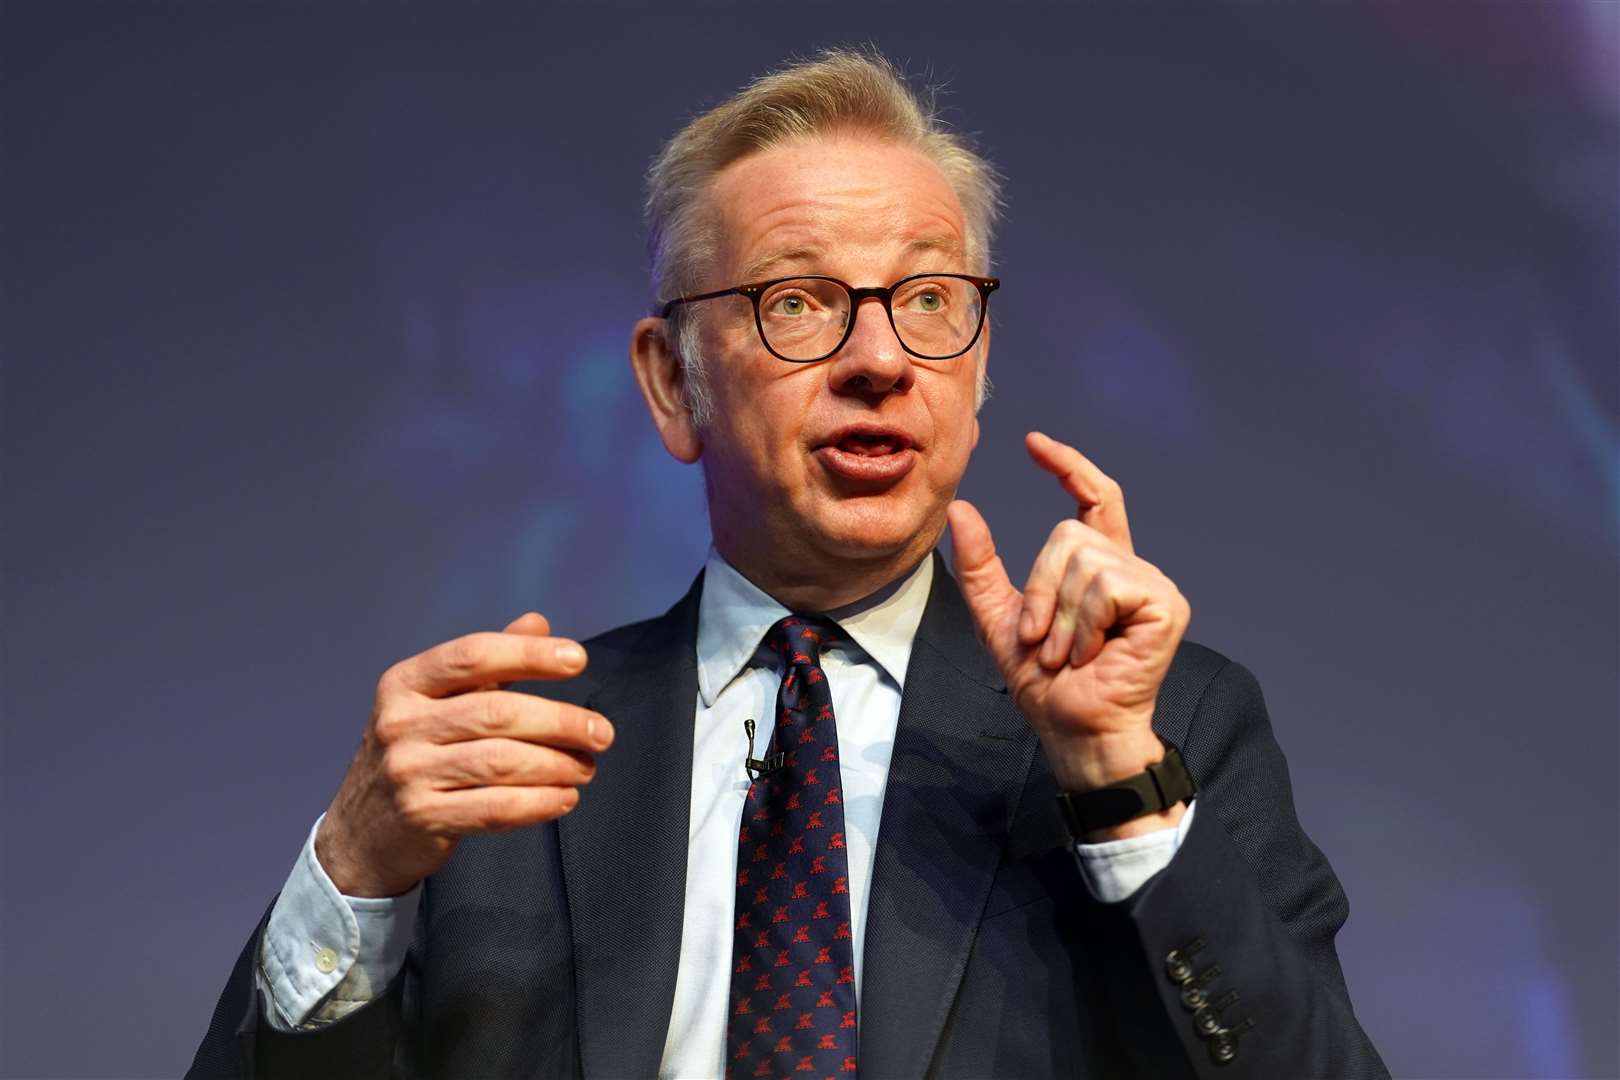 Housing Secretary Michael Gove said relaxing the planning rules will help the drive to net zero (PA)